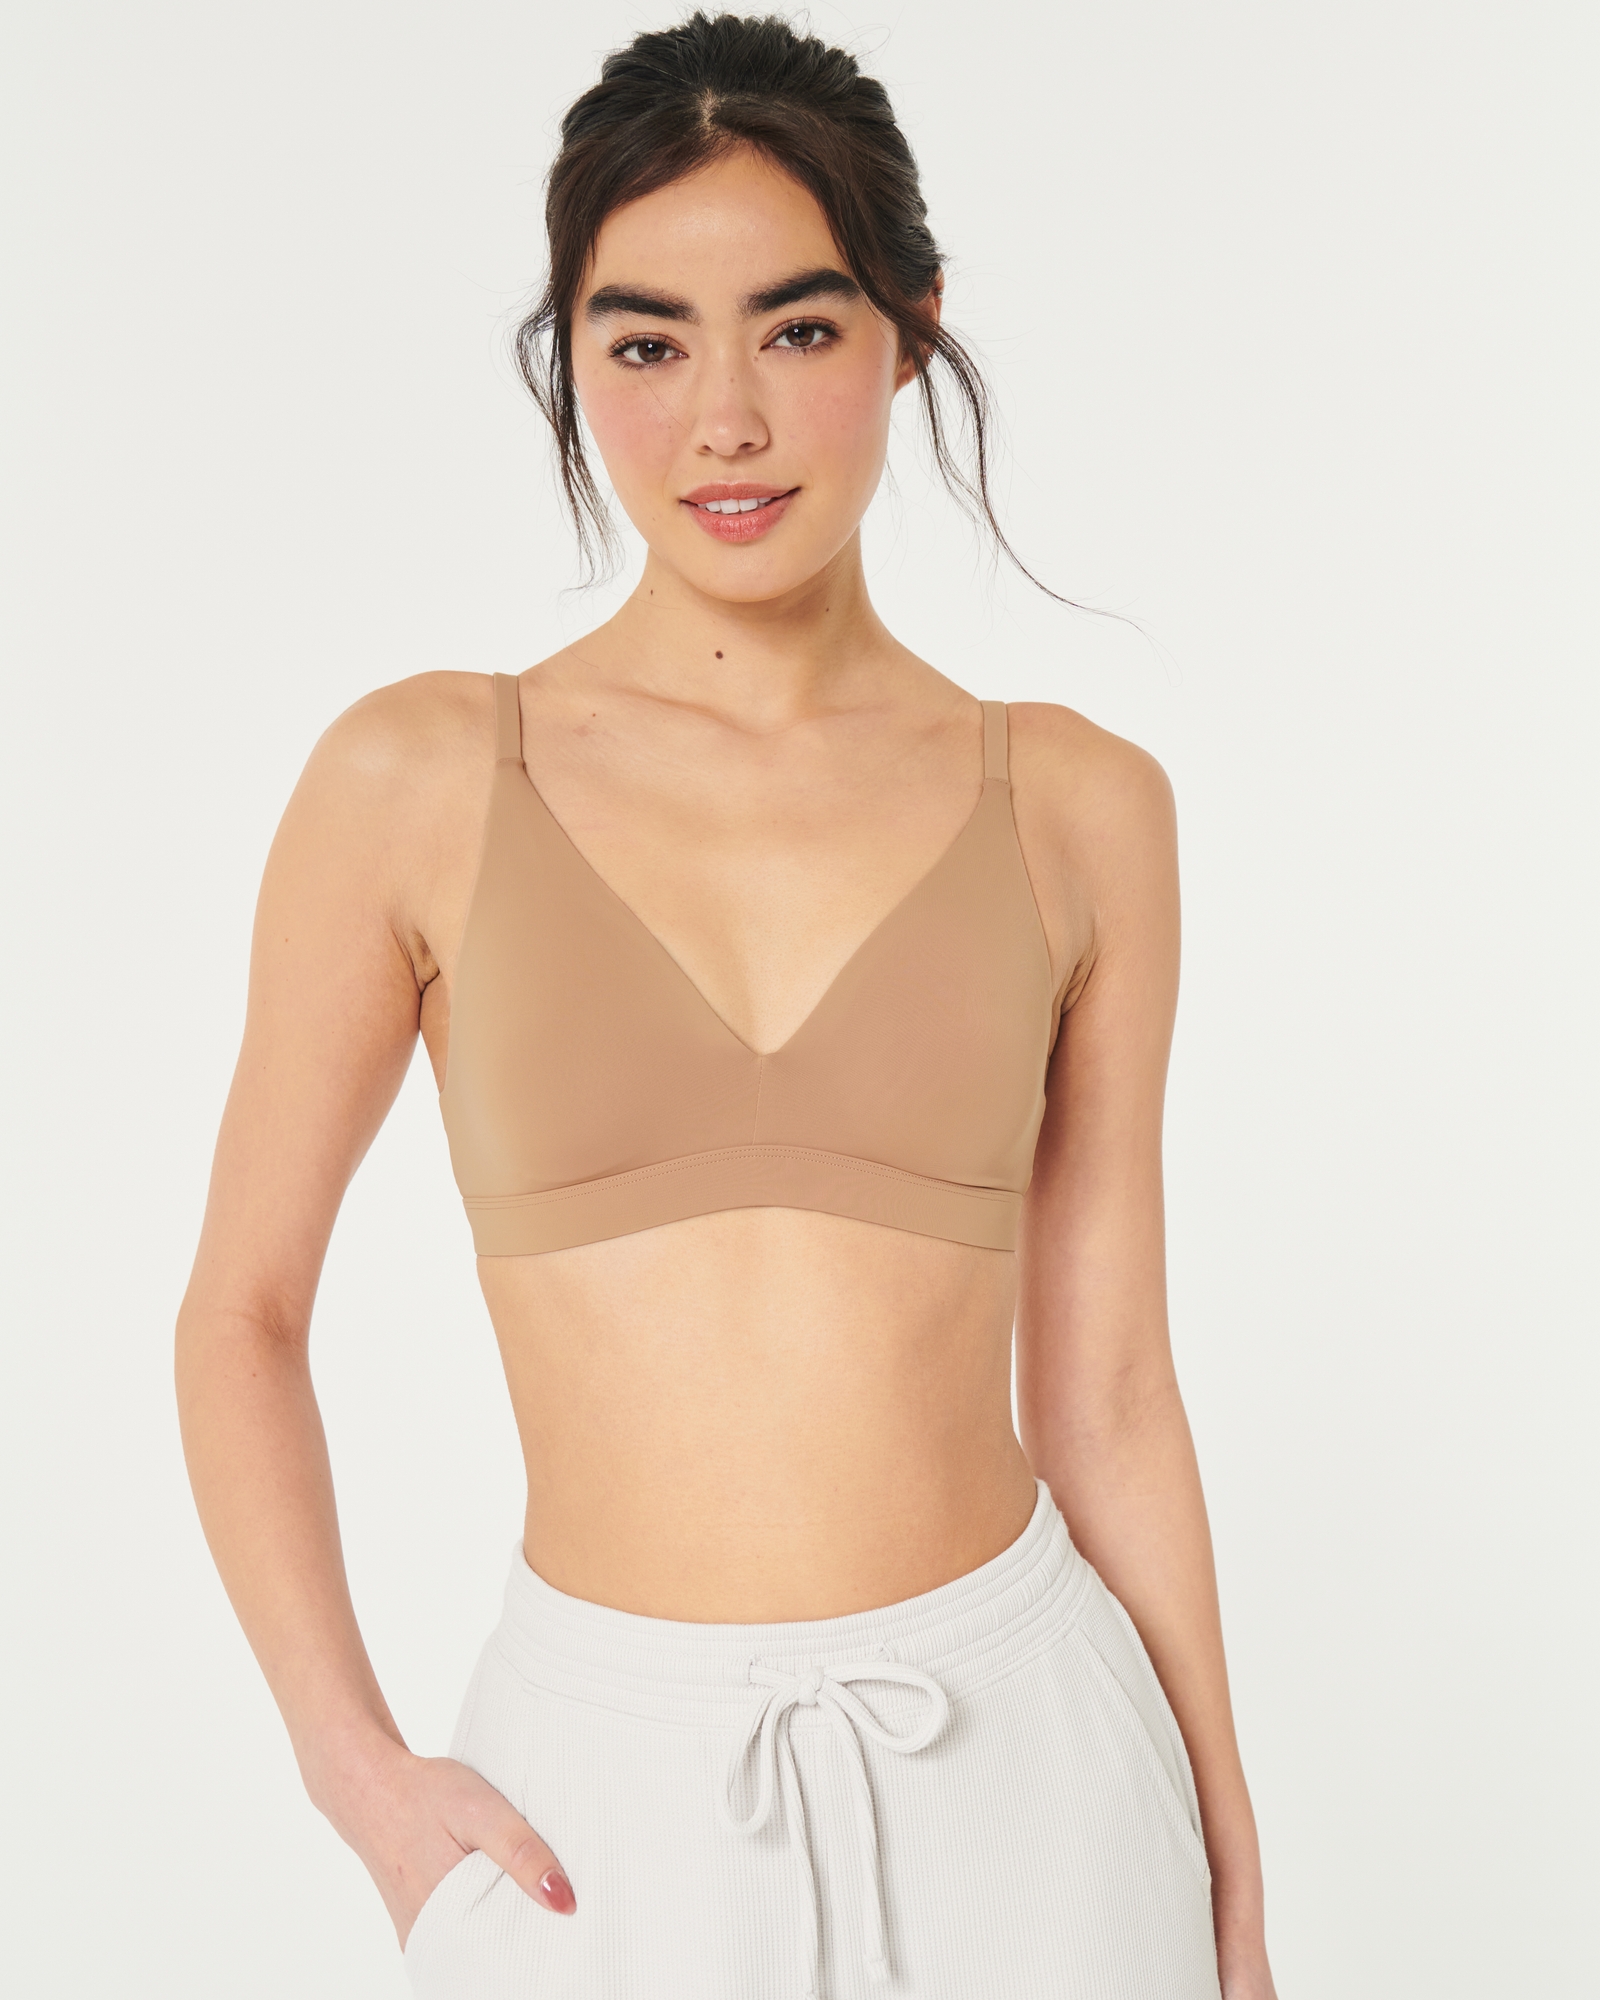 Hollister Gilly Hicks Micro-modal Triangle Bralette in Natural